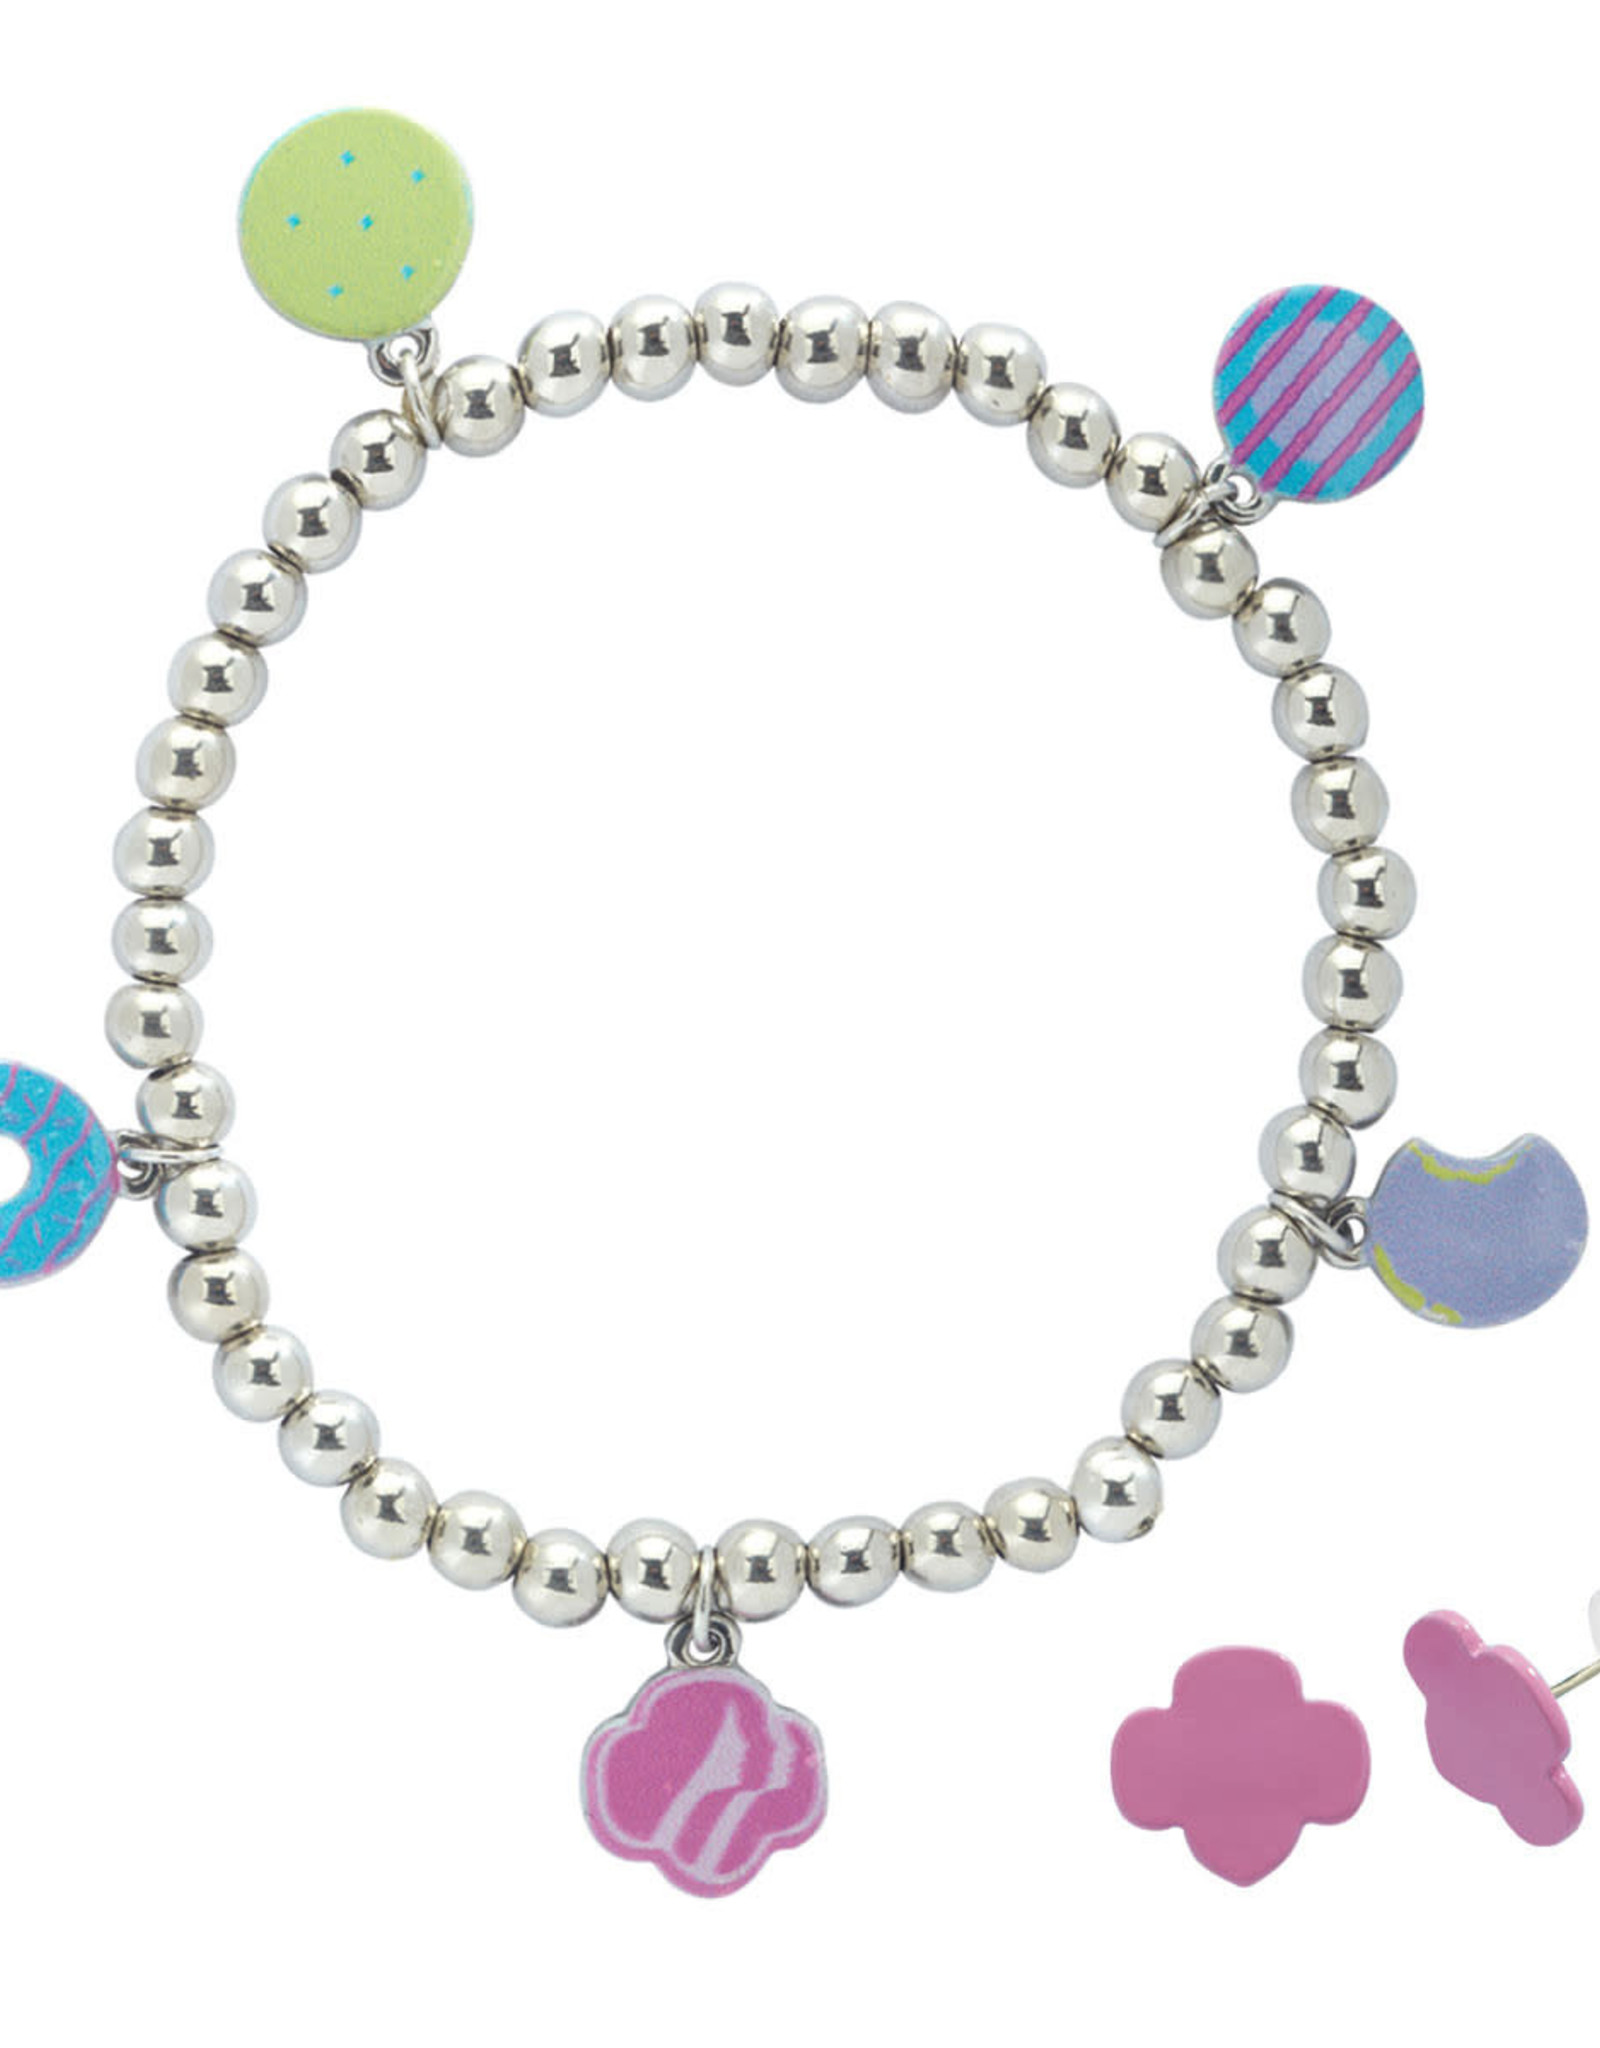 Bright Cookies Stretch Charm Bracelet and Earrings